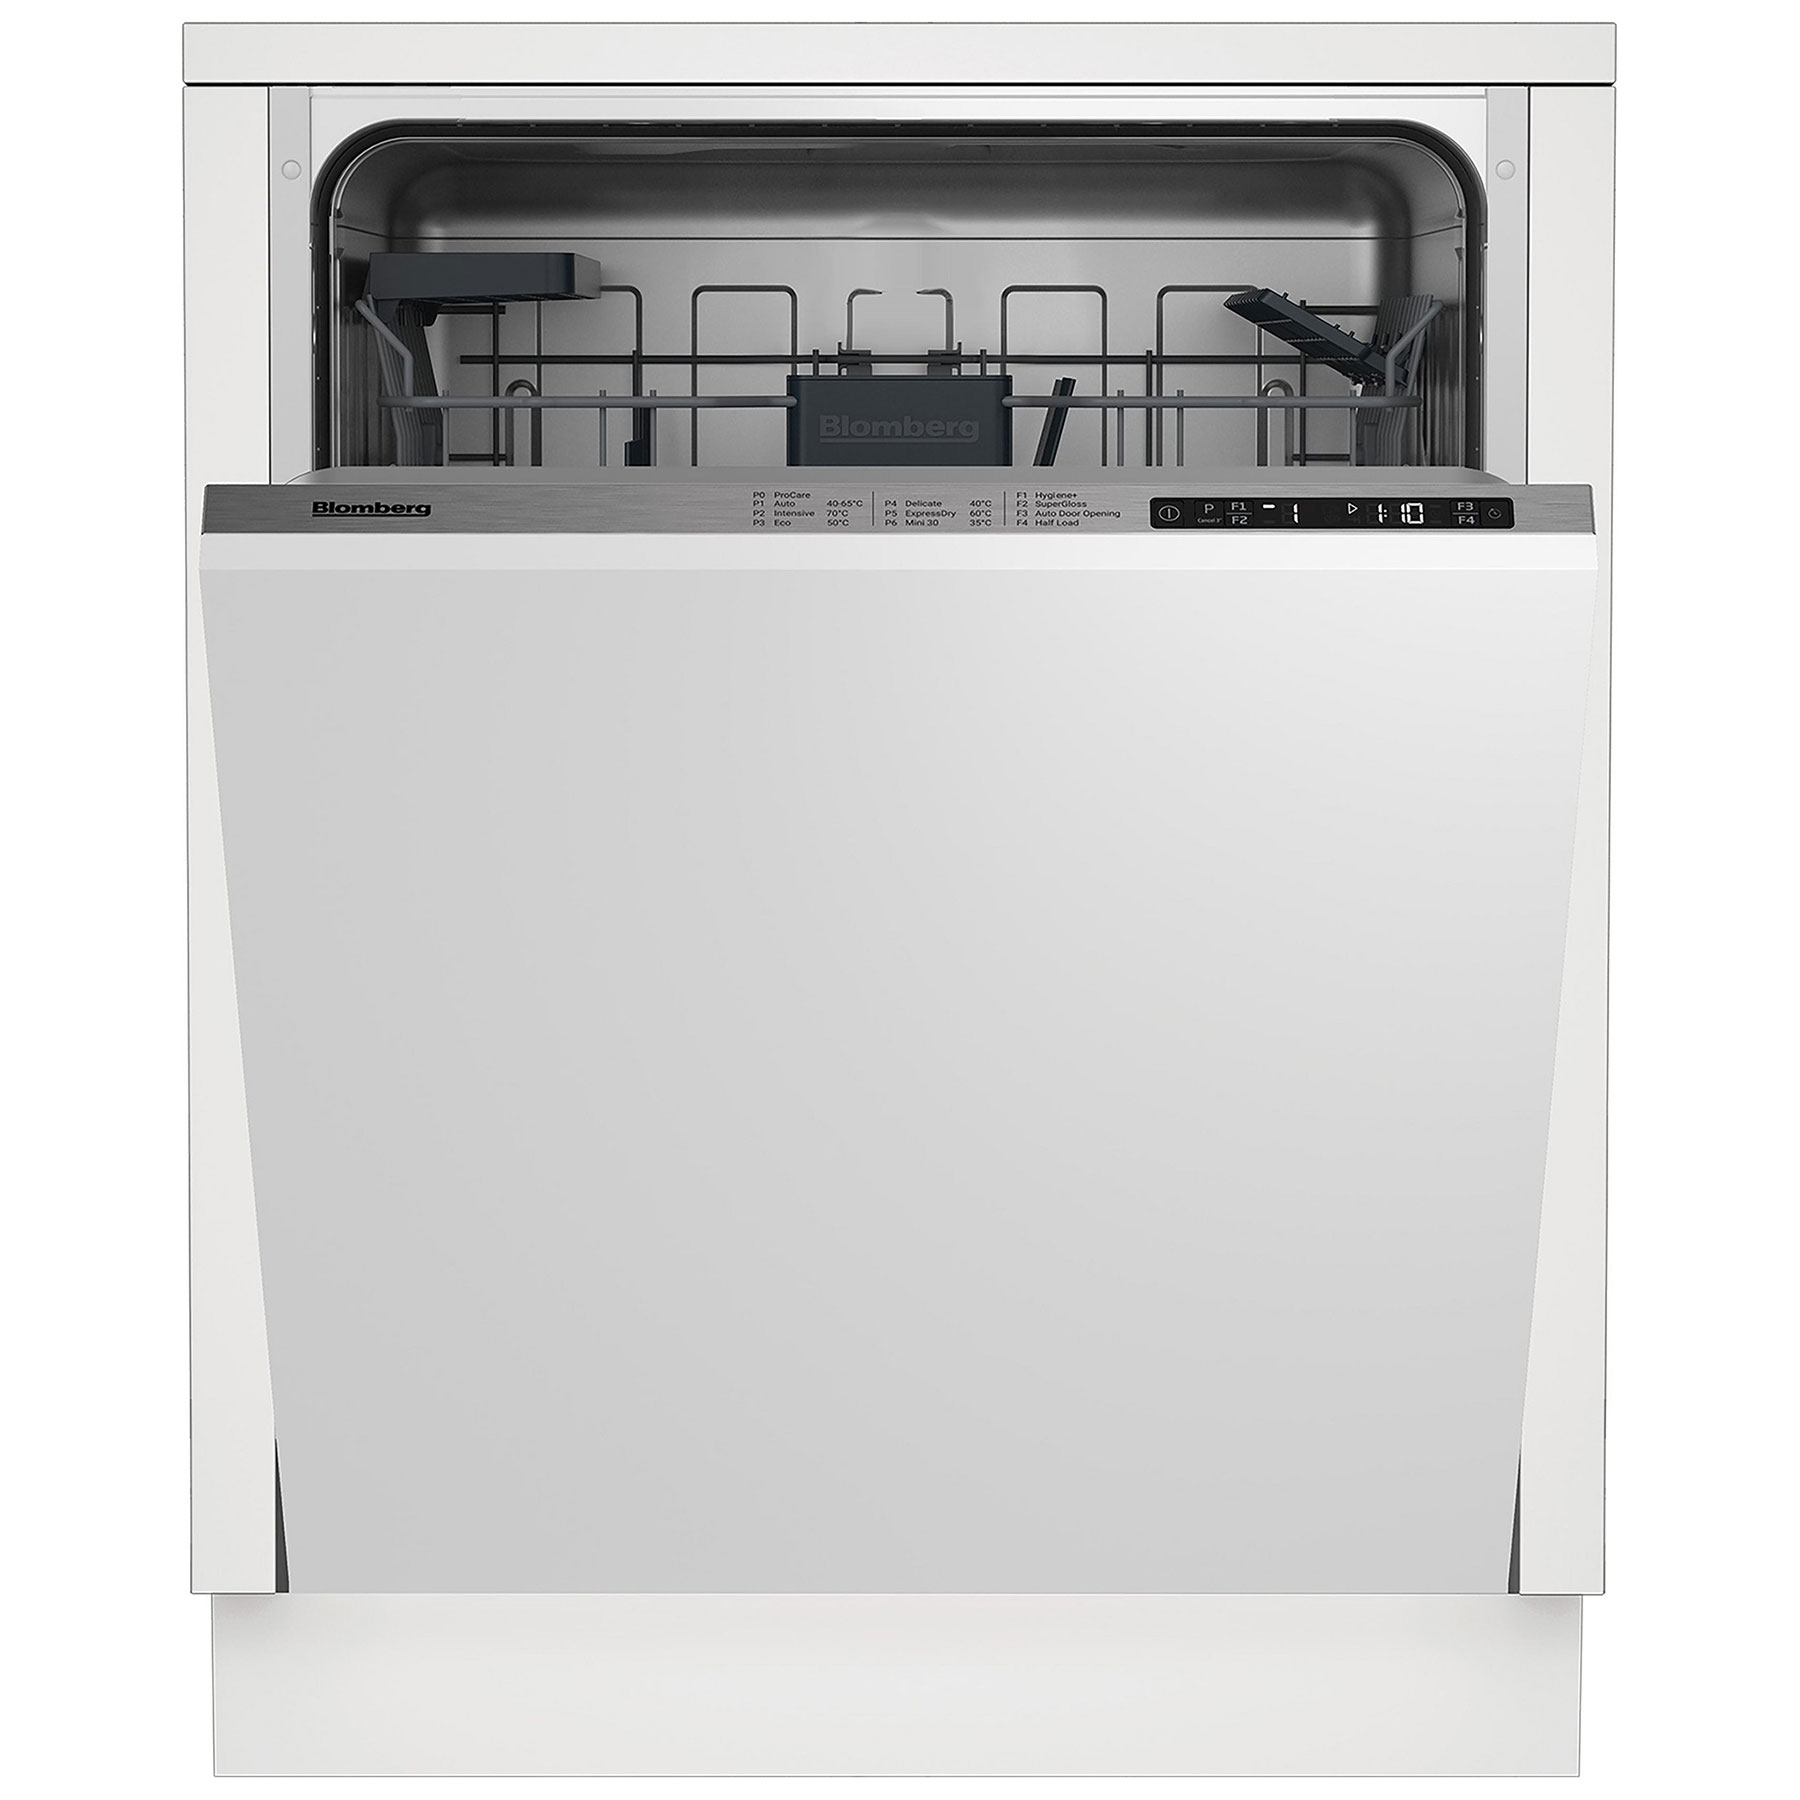 Image of Blomberg LDV42320 60cm Fully Integrated Dishwasher 14 Place D Rated